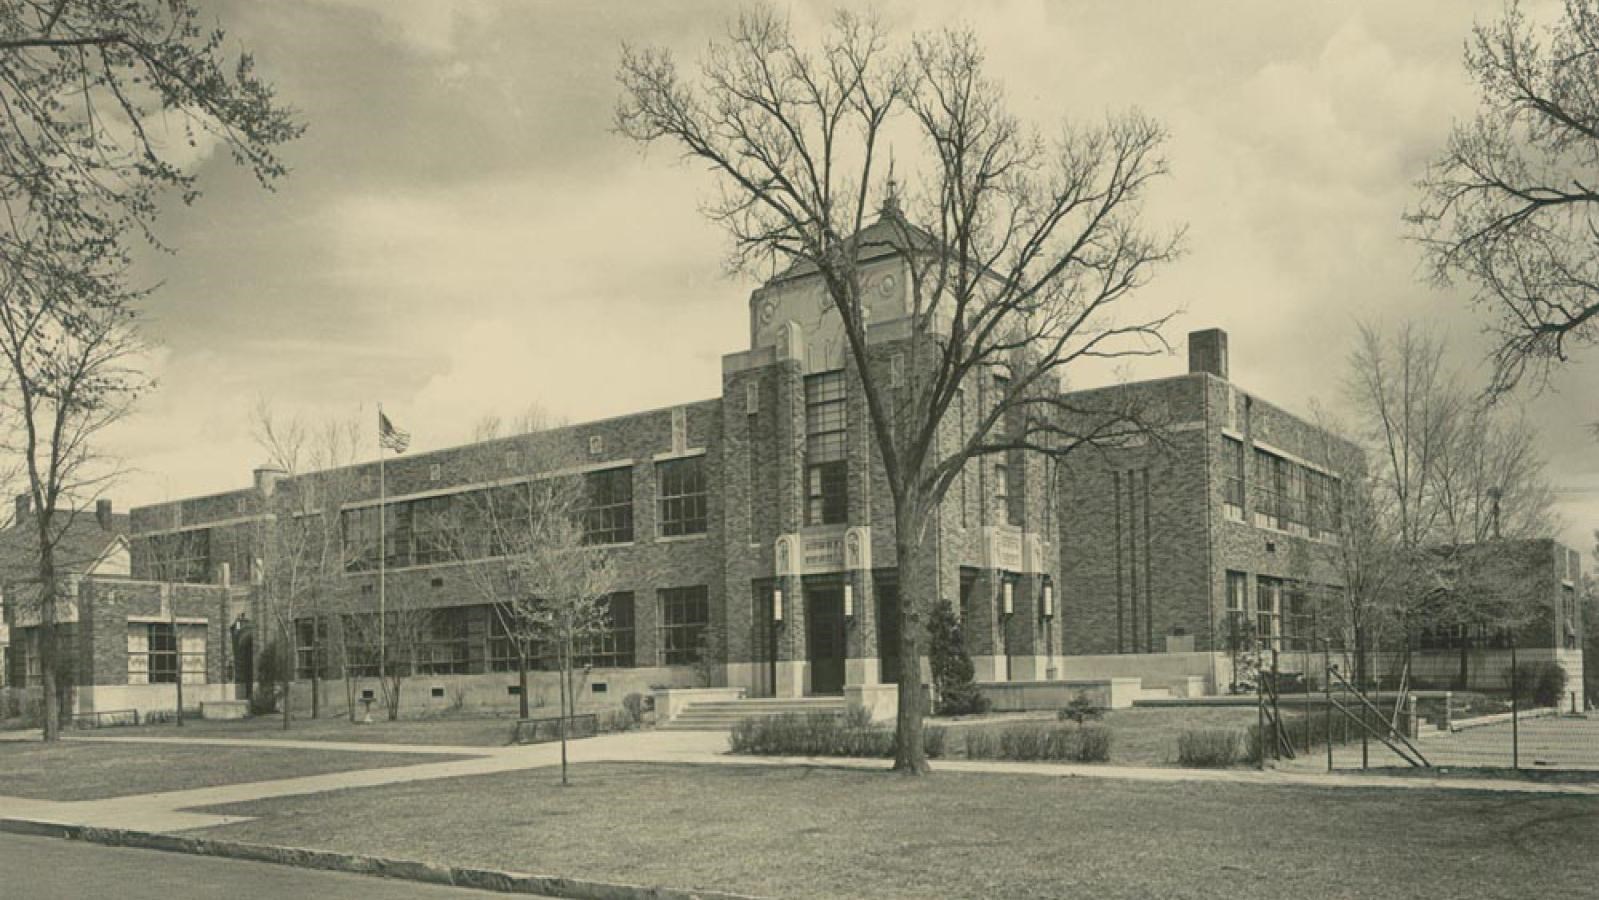 A black and white image of the Sumner Elementary School.